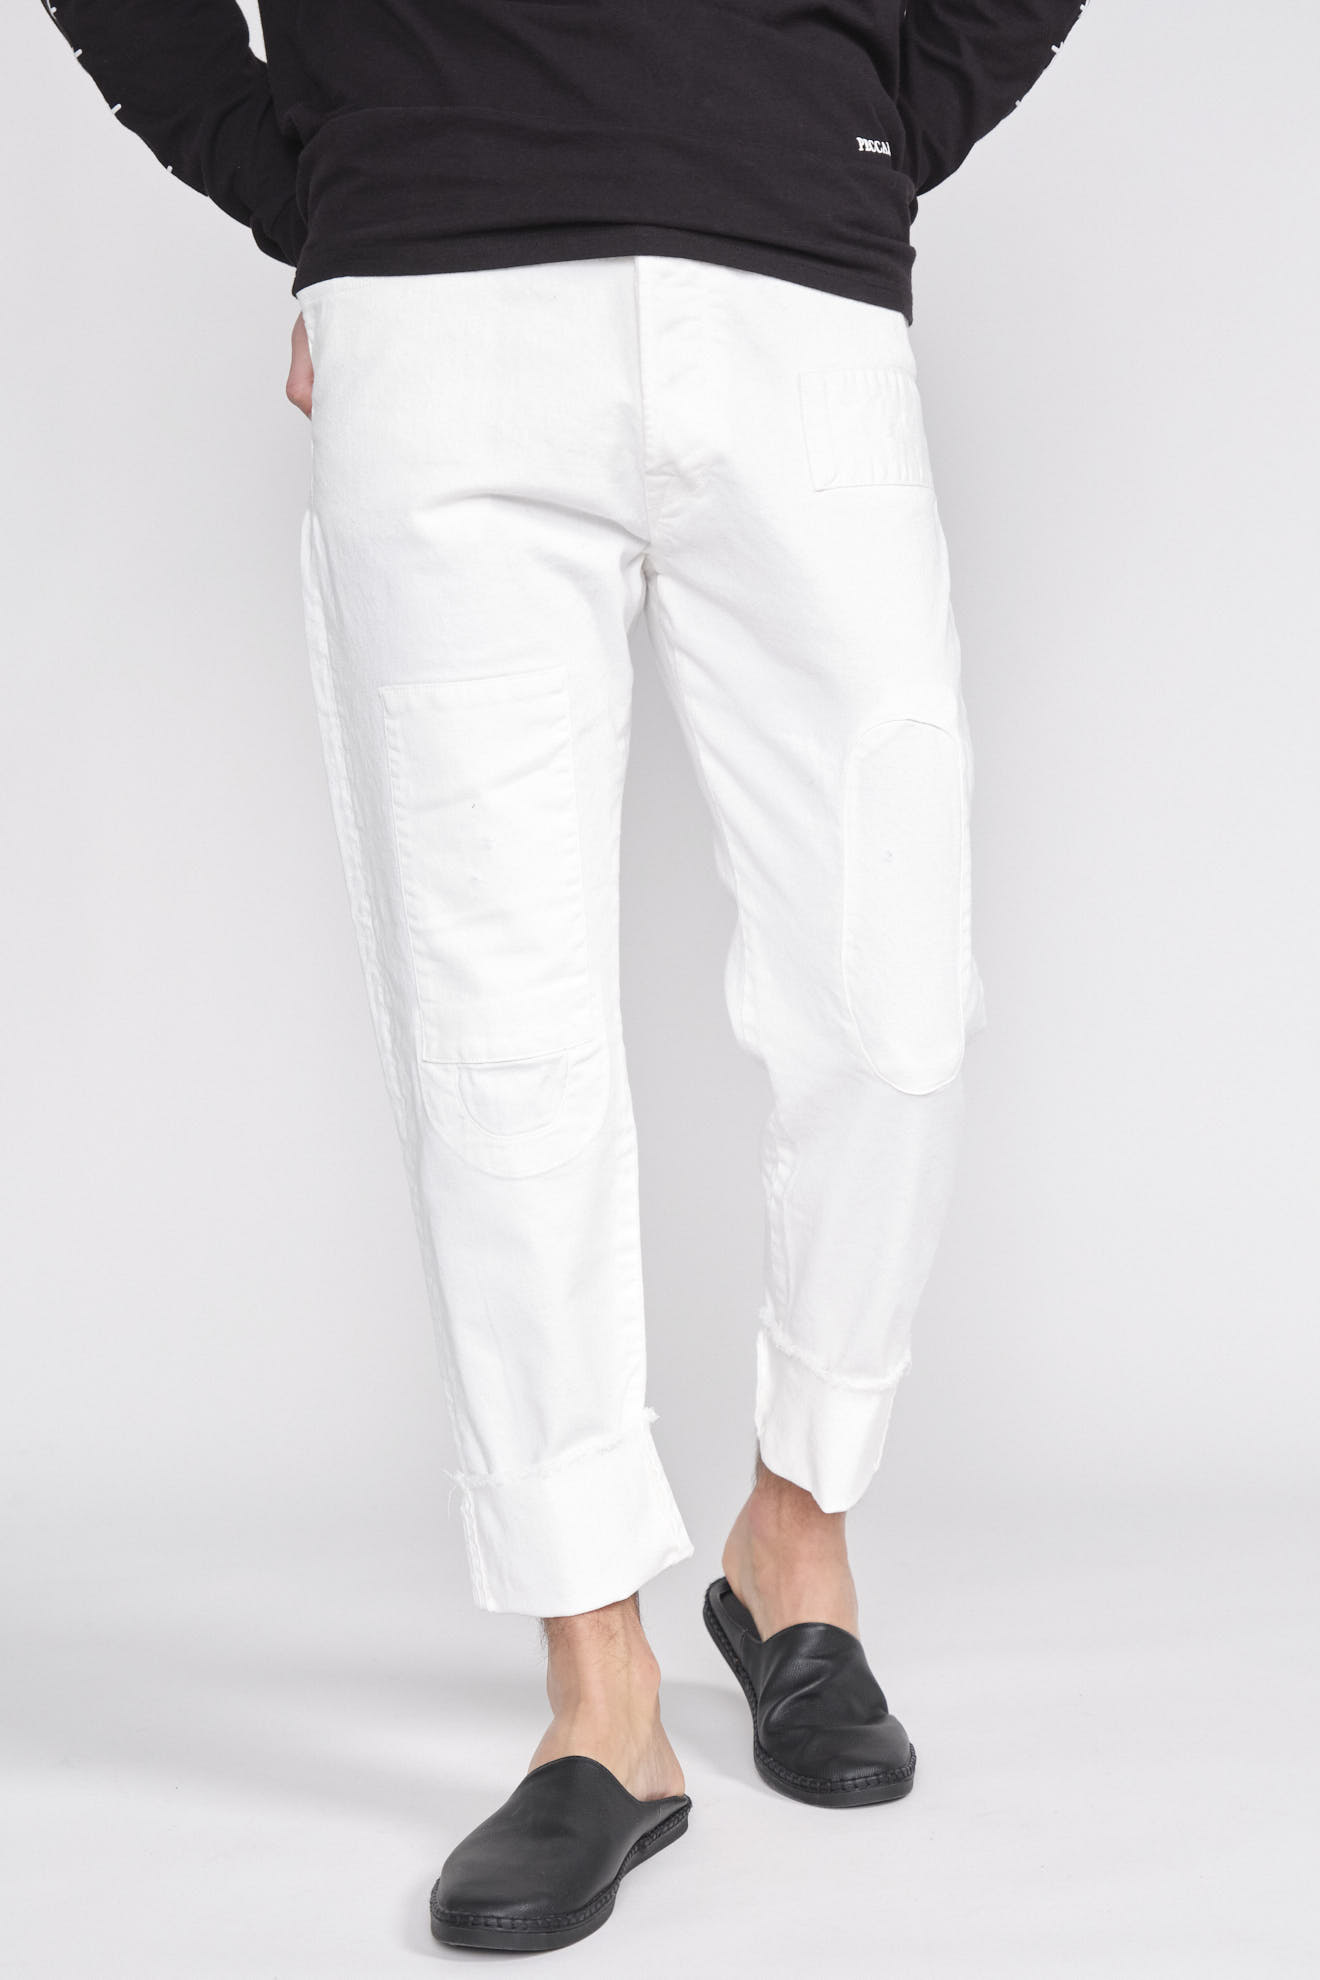 maurizio massimino Jose - denim jeans with patch patches white 48